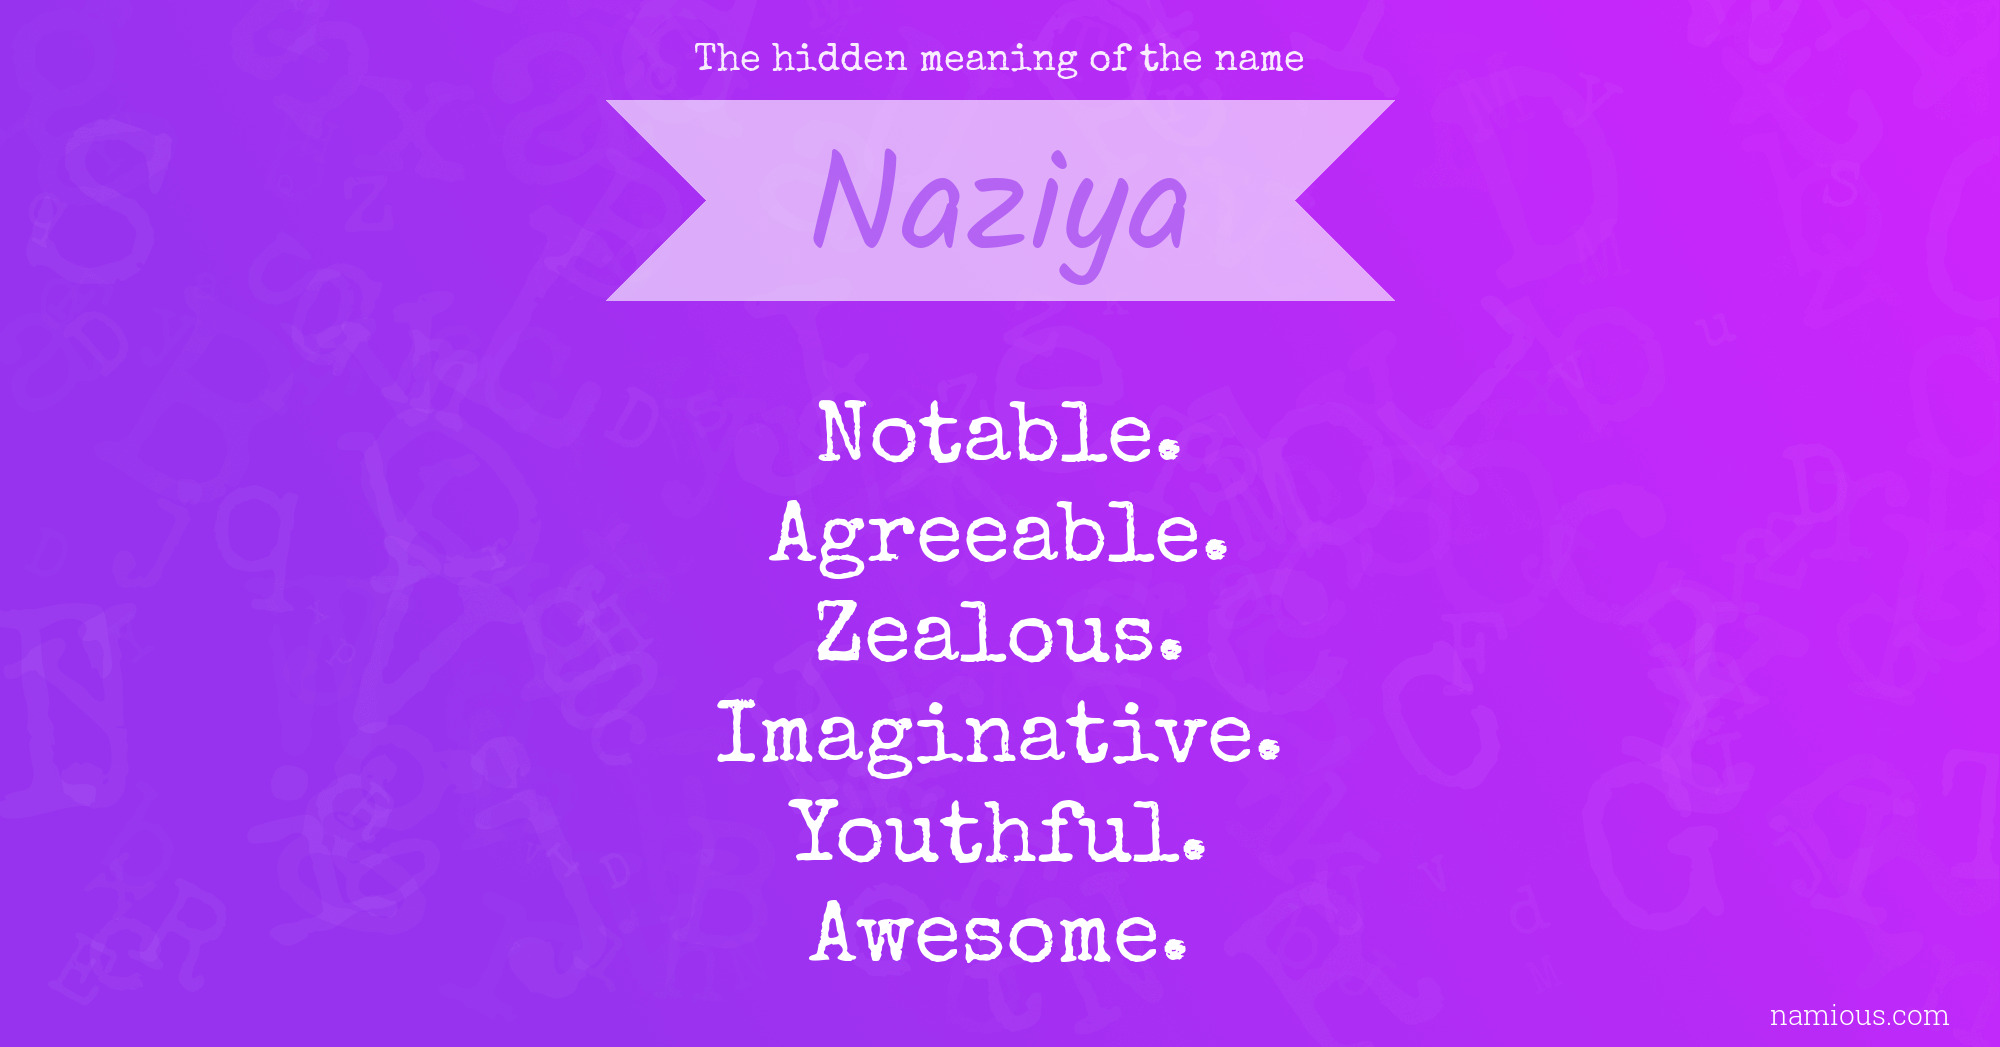 The hidden meaning of the name Naziya